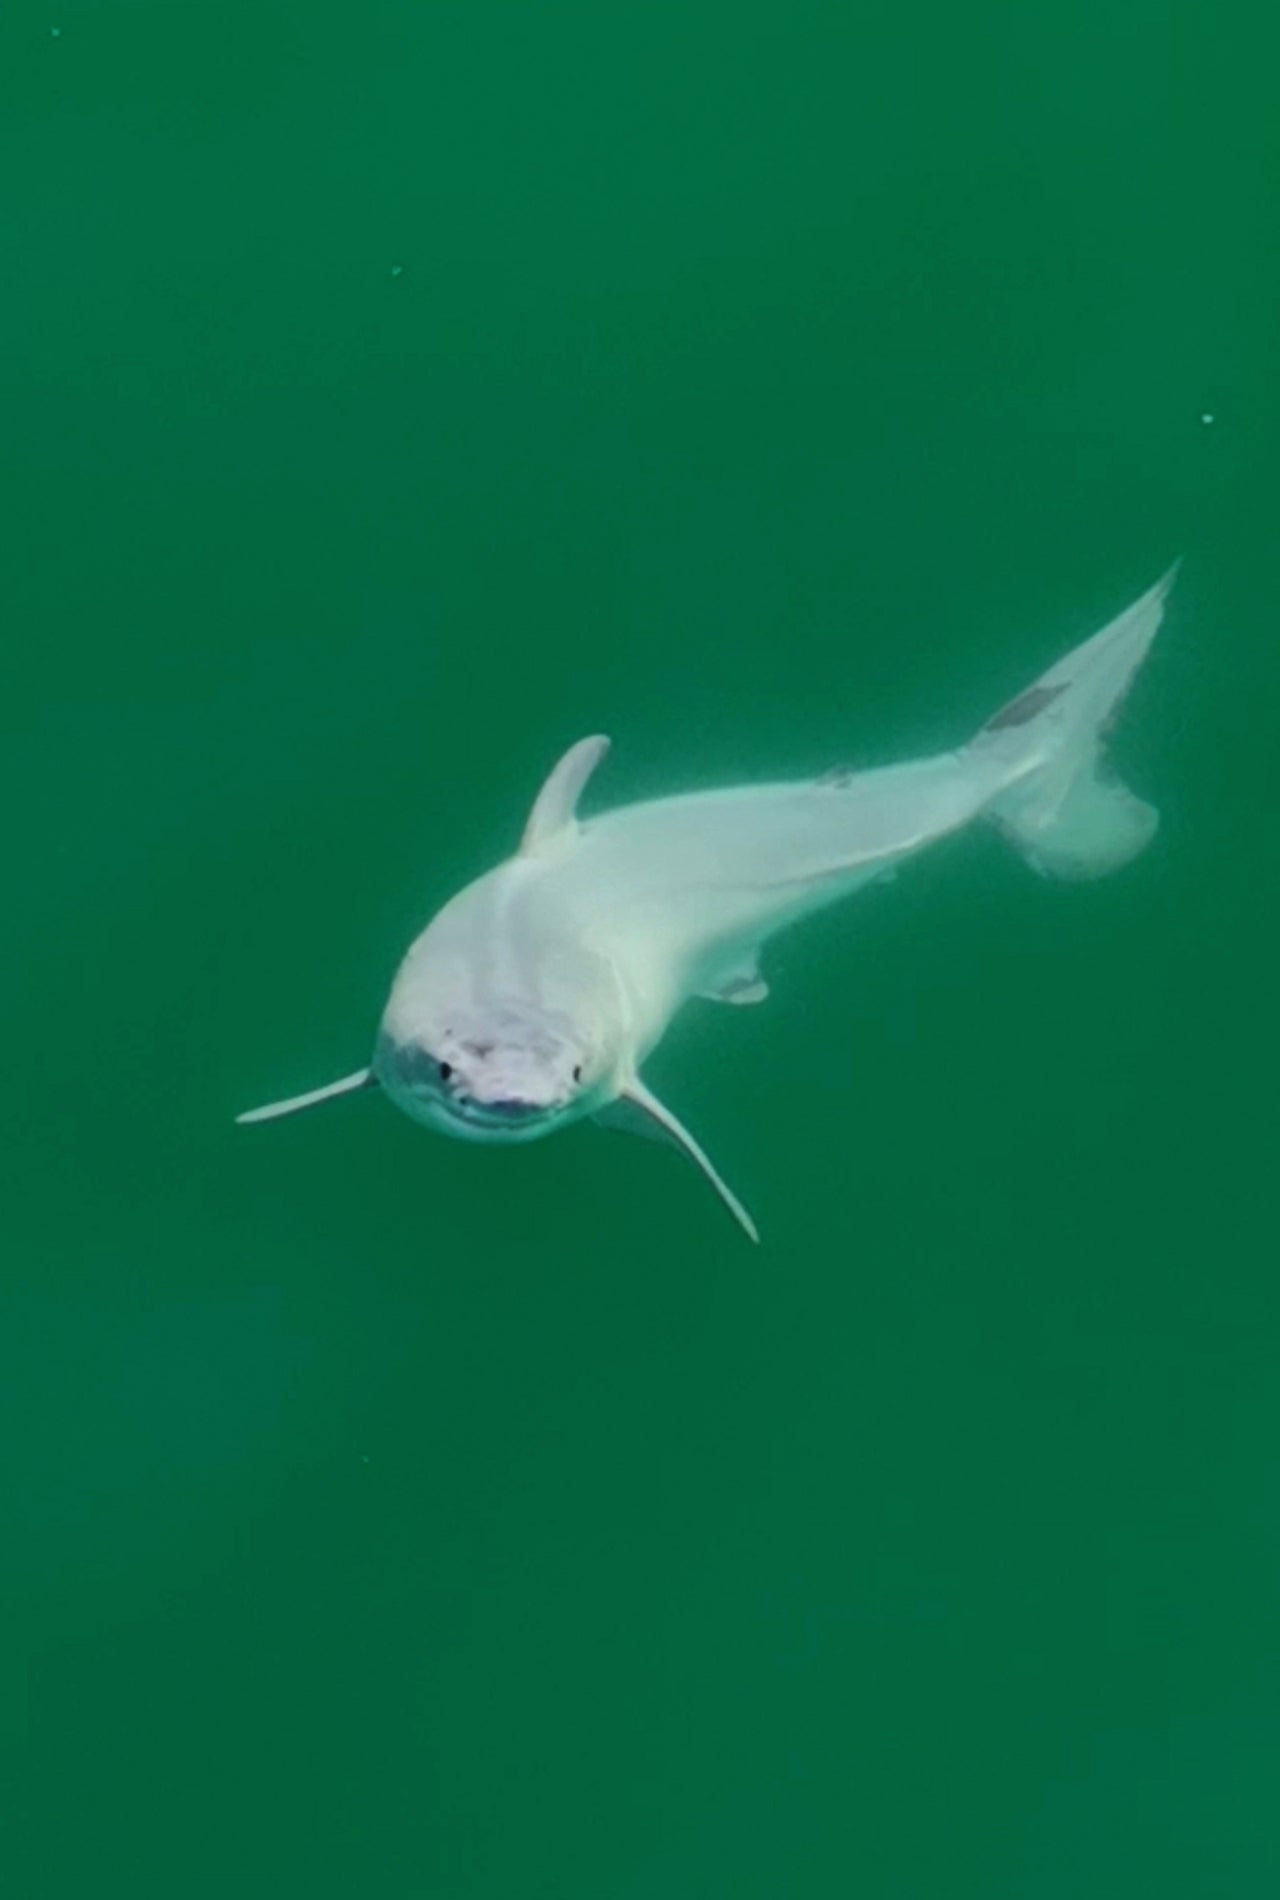 First-ever sighting of a live newborn great white, UCR News